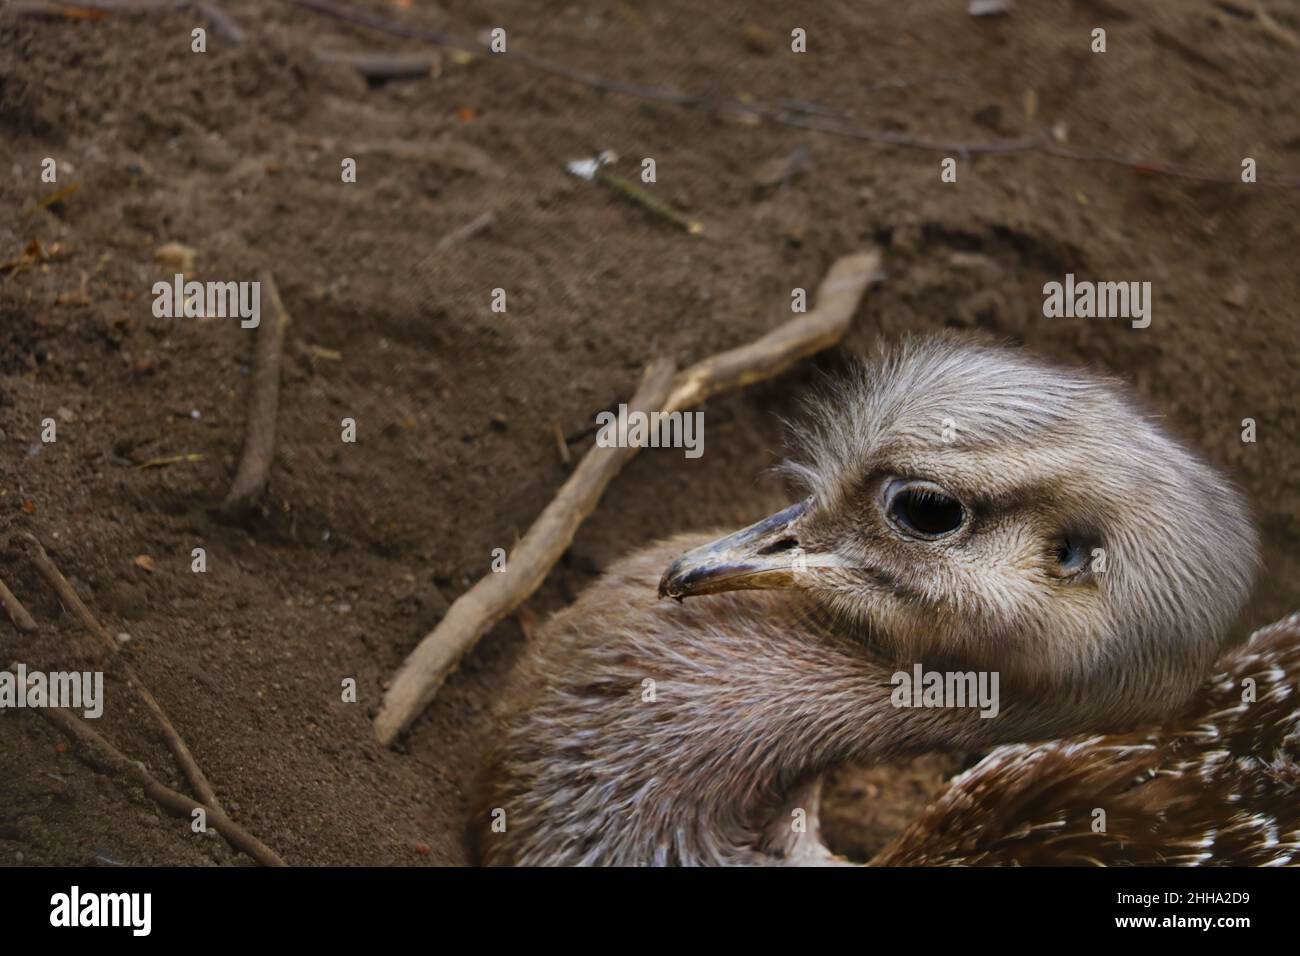 Close-up on the head of an ostrich sitting in the sand Stock Photo